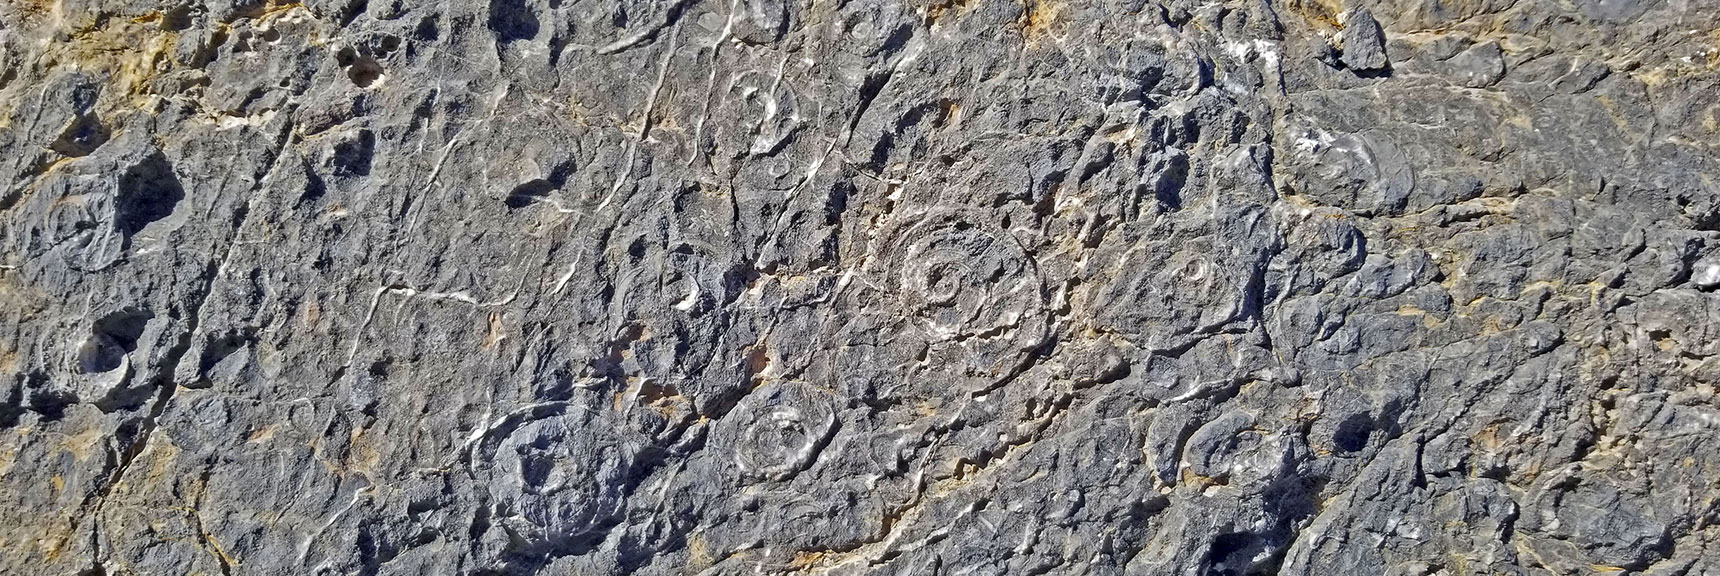 Most Fossils are Embedded in Dark Rock Along the Northern Base of Fossil Ridge| Fossil Ridge End to End | Sheep Range | Desert National Wildlife Refuge, Nevada